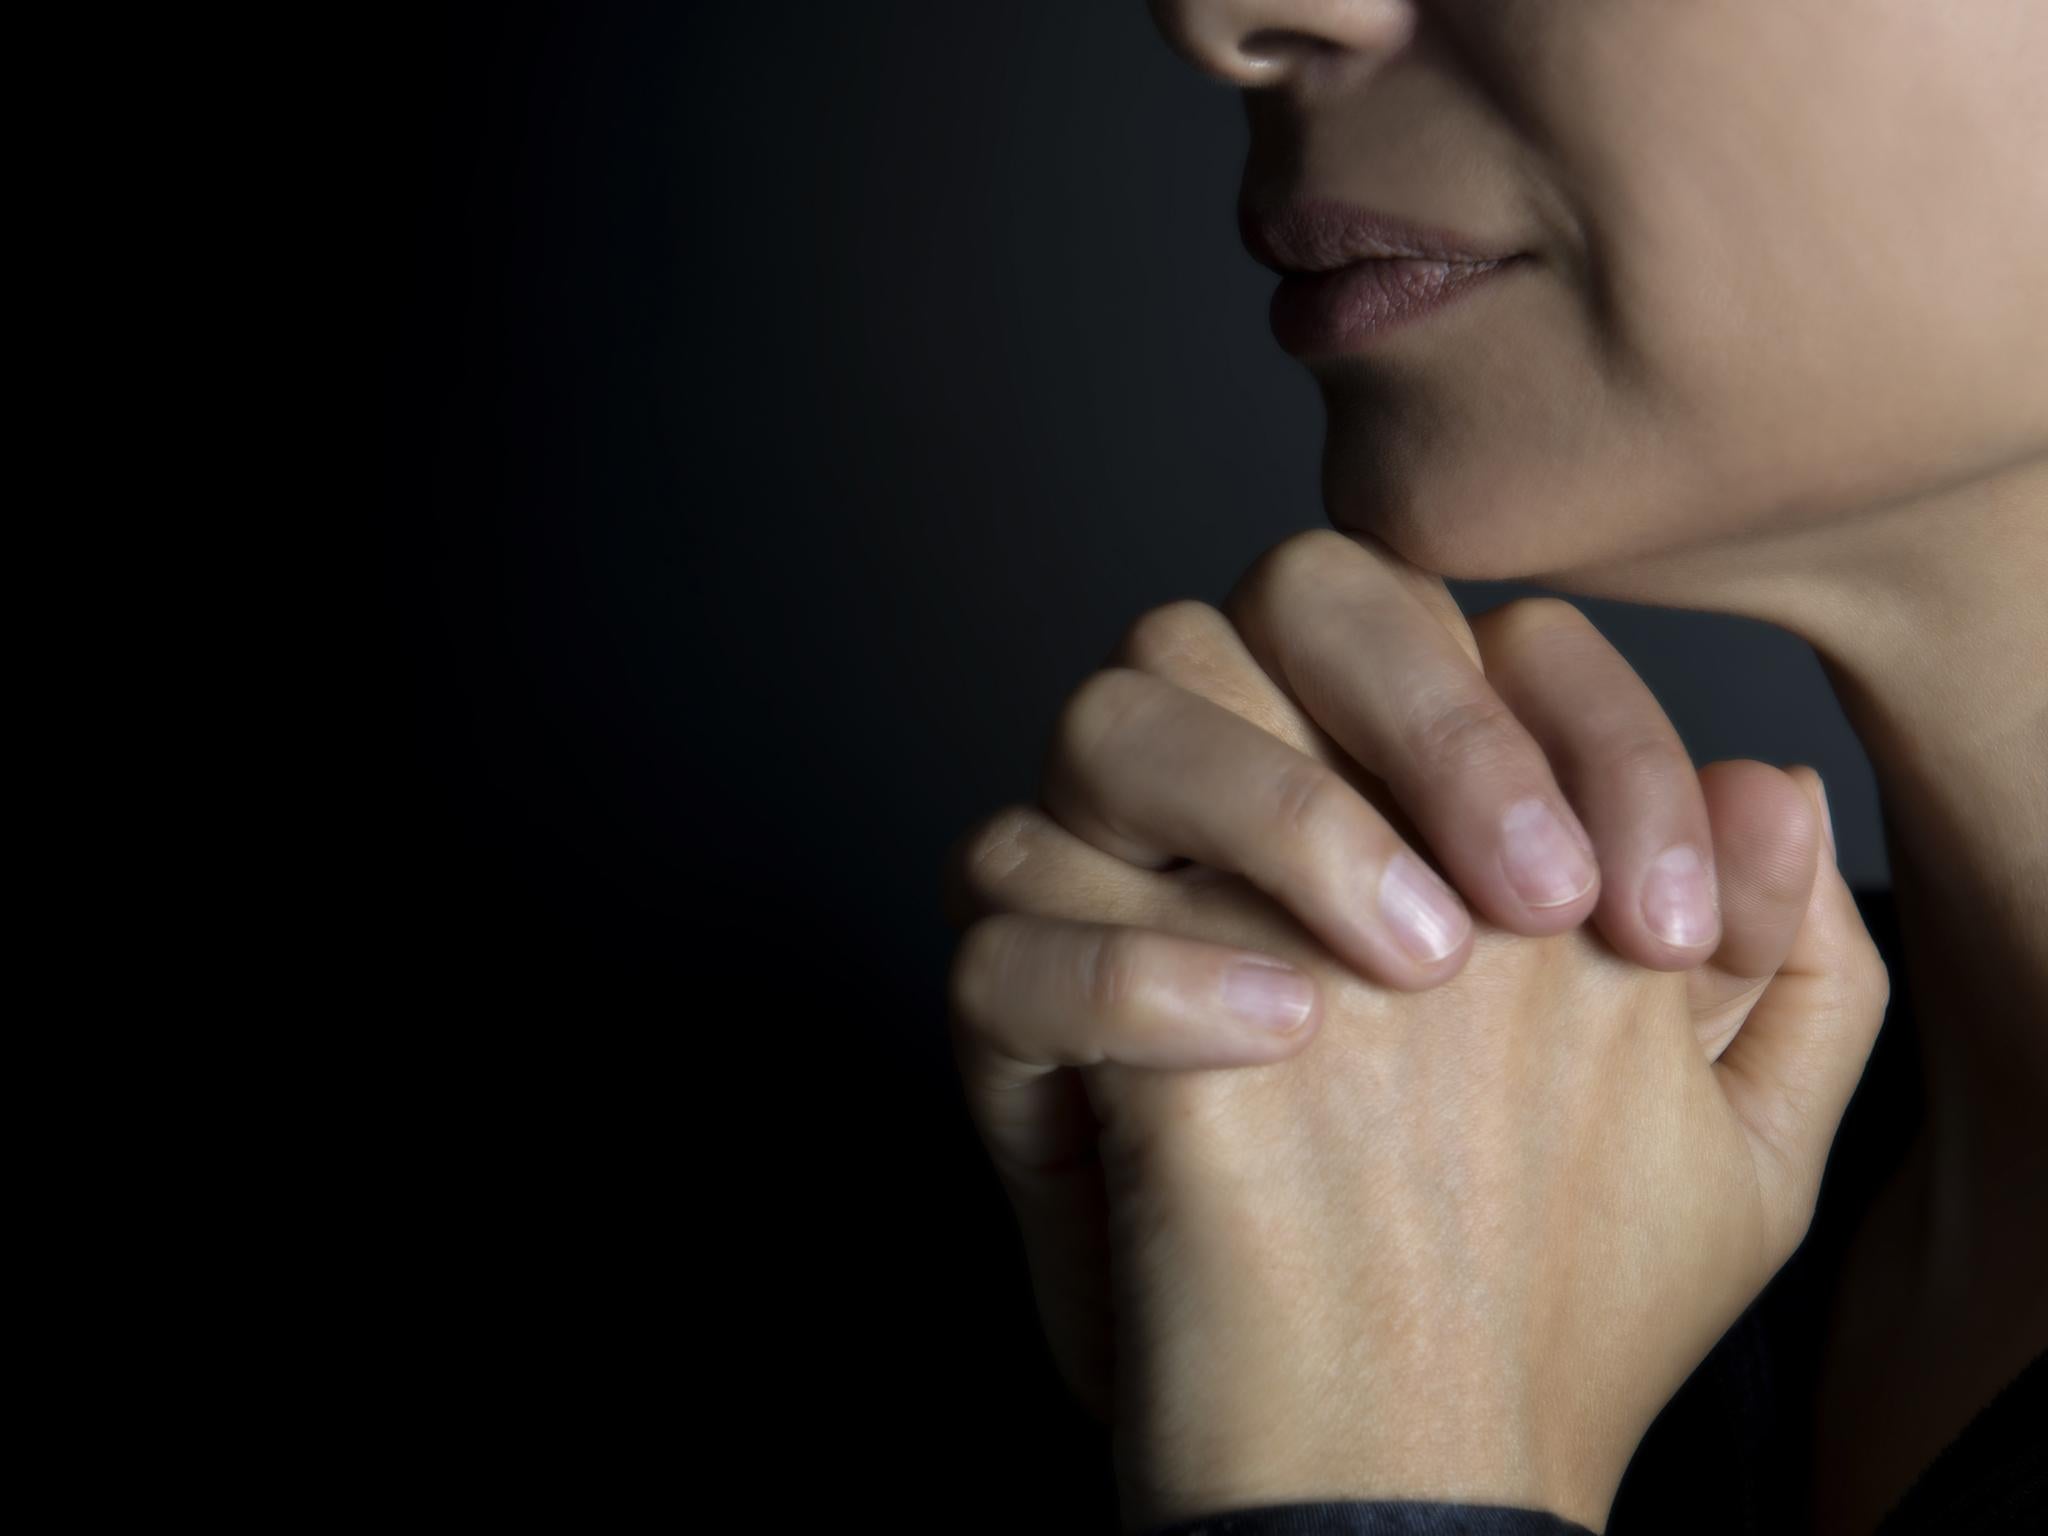 Some 20 per cent of people say they occasionally pray despite not being religious